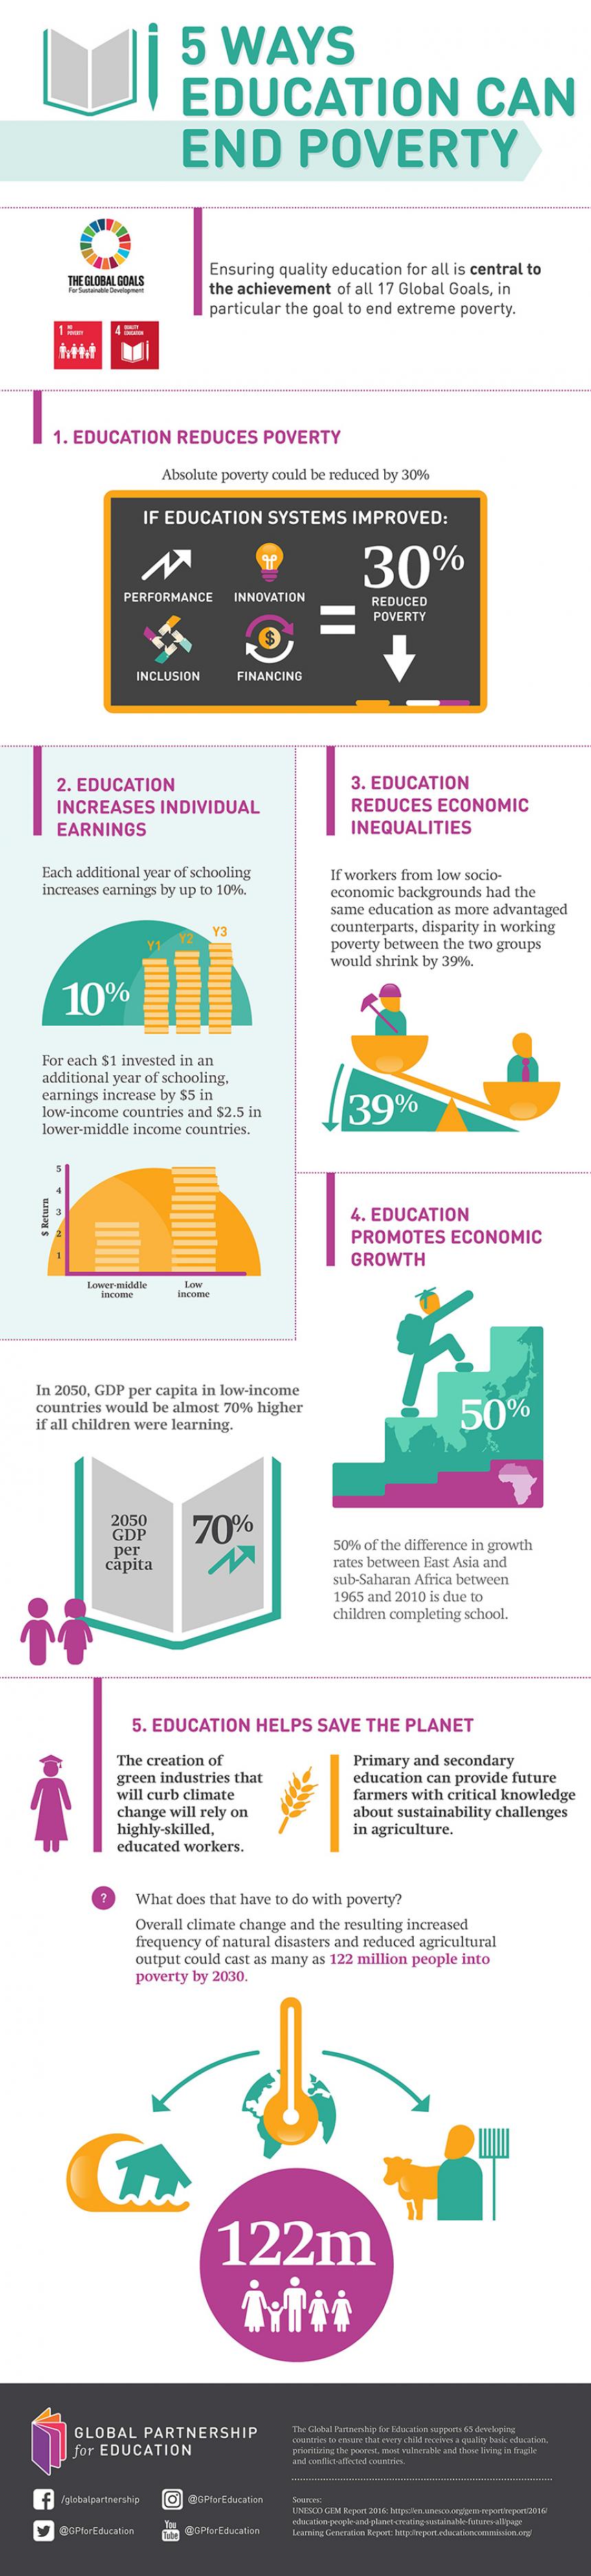 5 ways education can end poverty | Global Partnership for Education